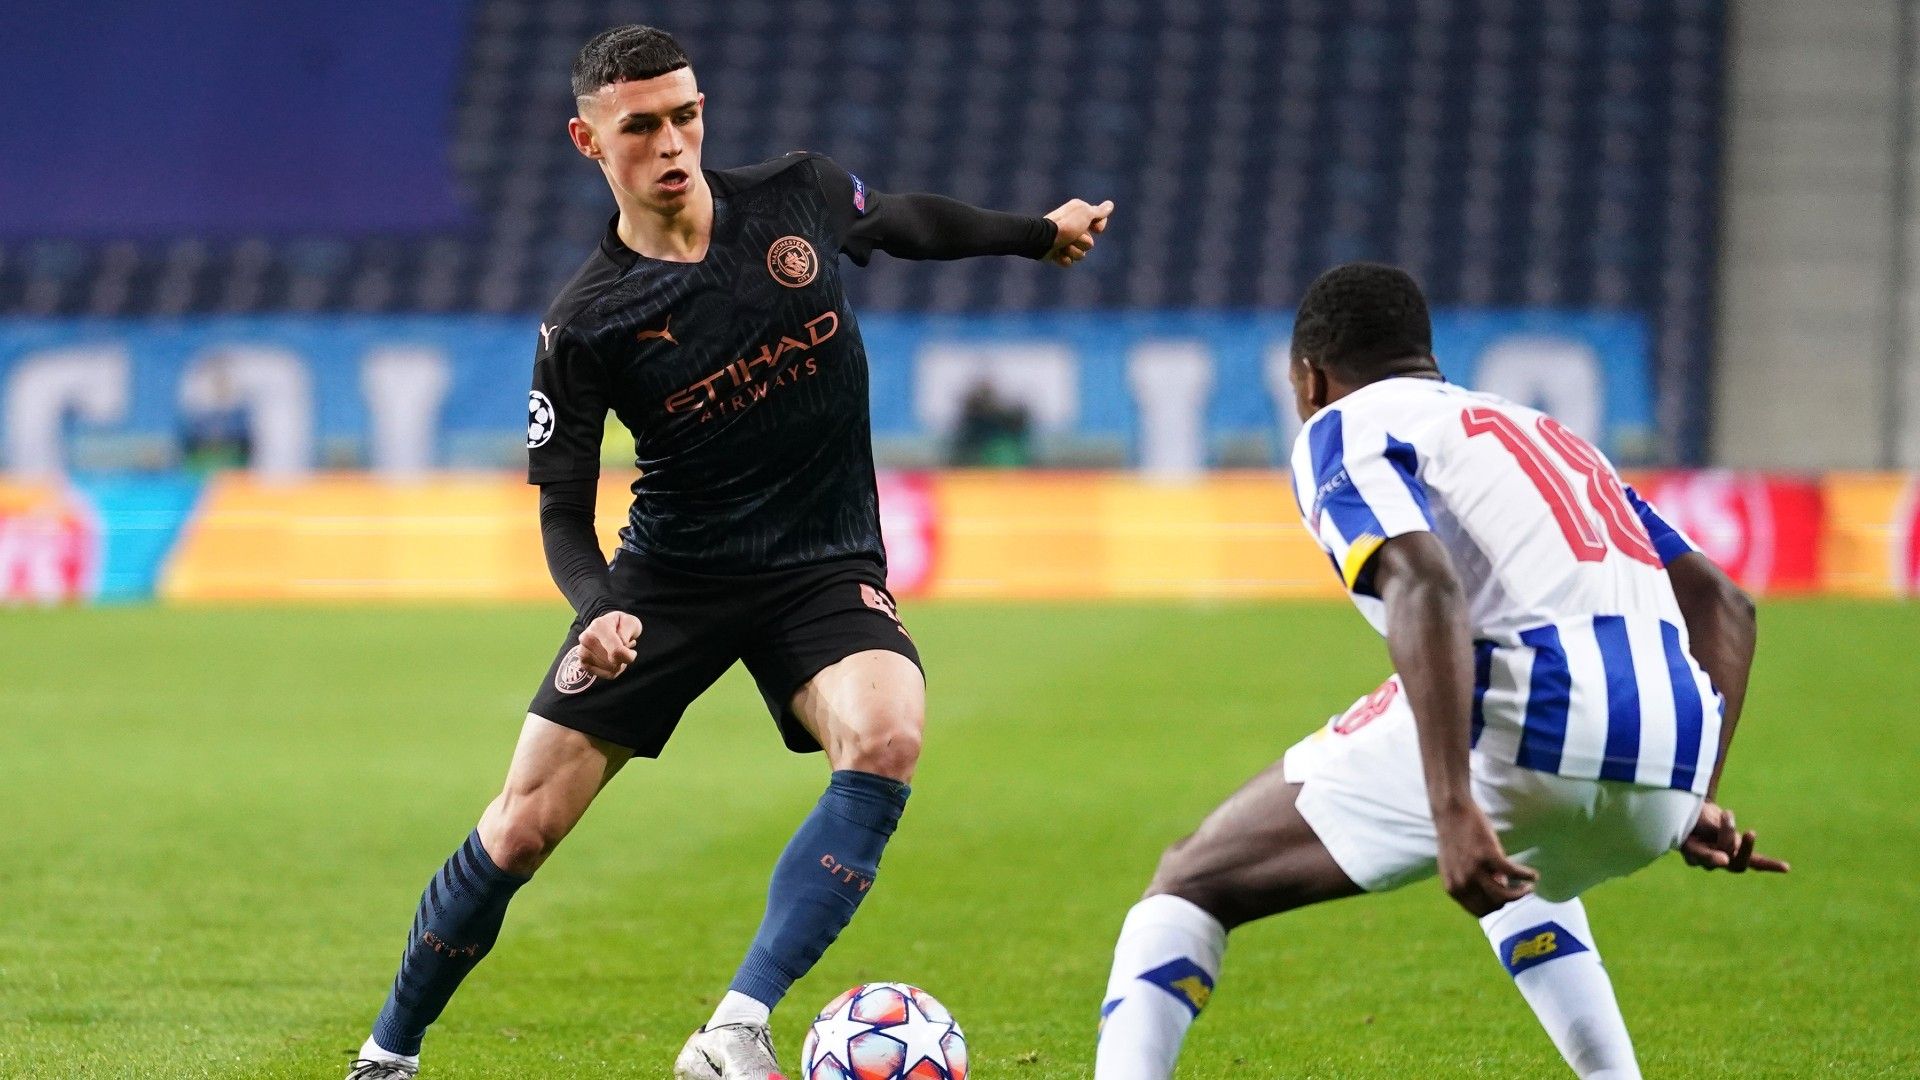 What a player! Pep Guardiola delighted by Phil Foden form at Manchester City